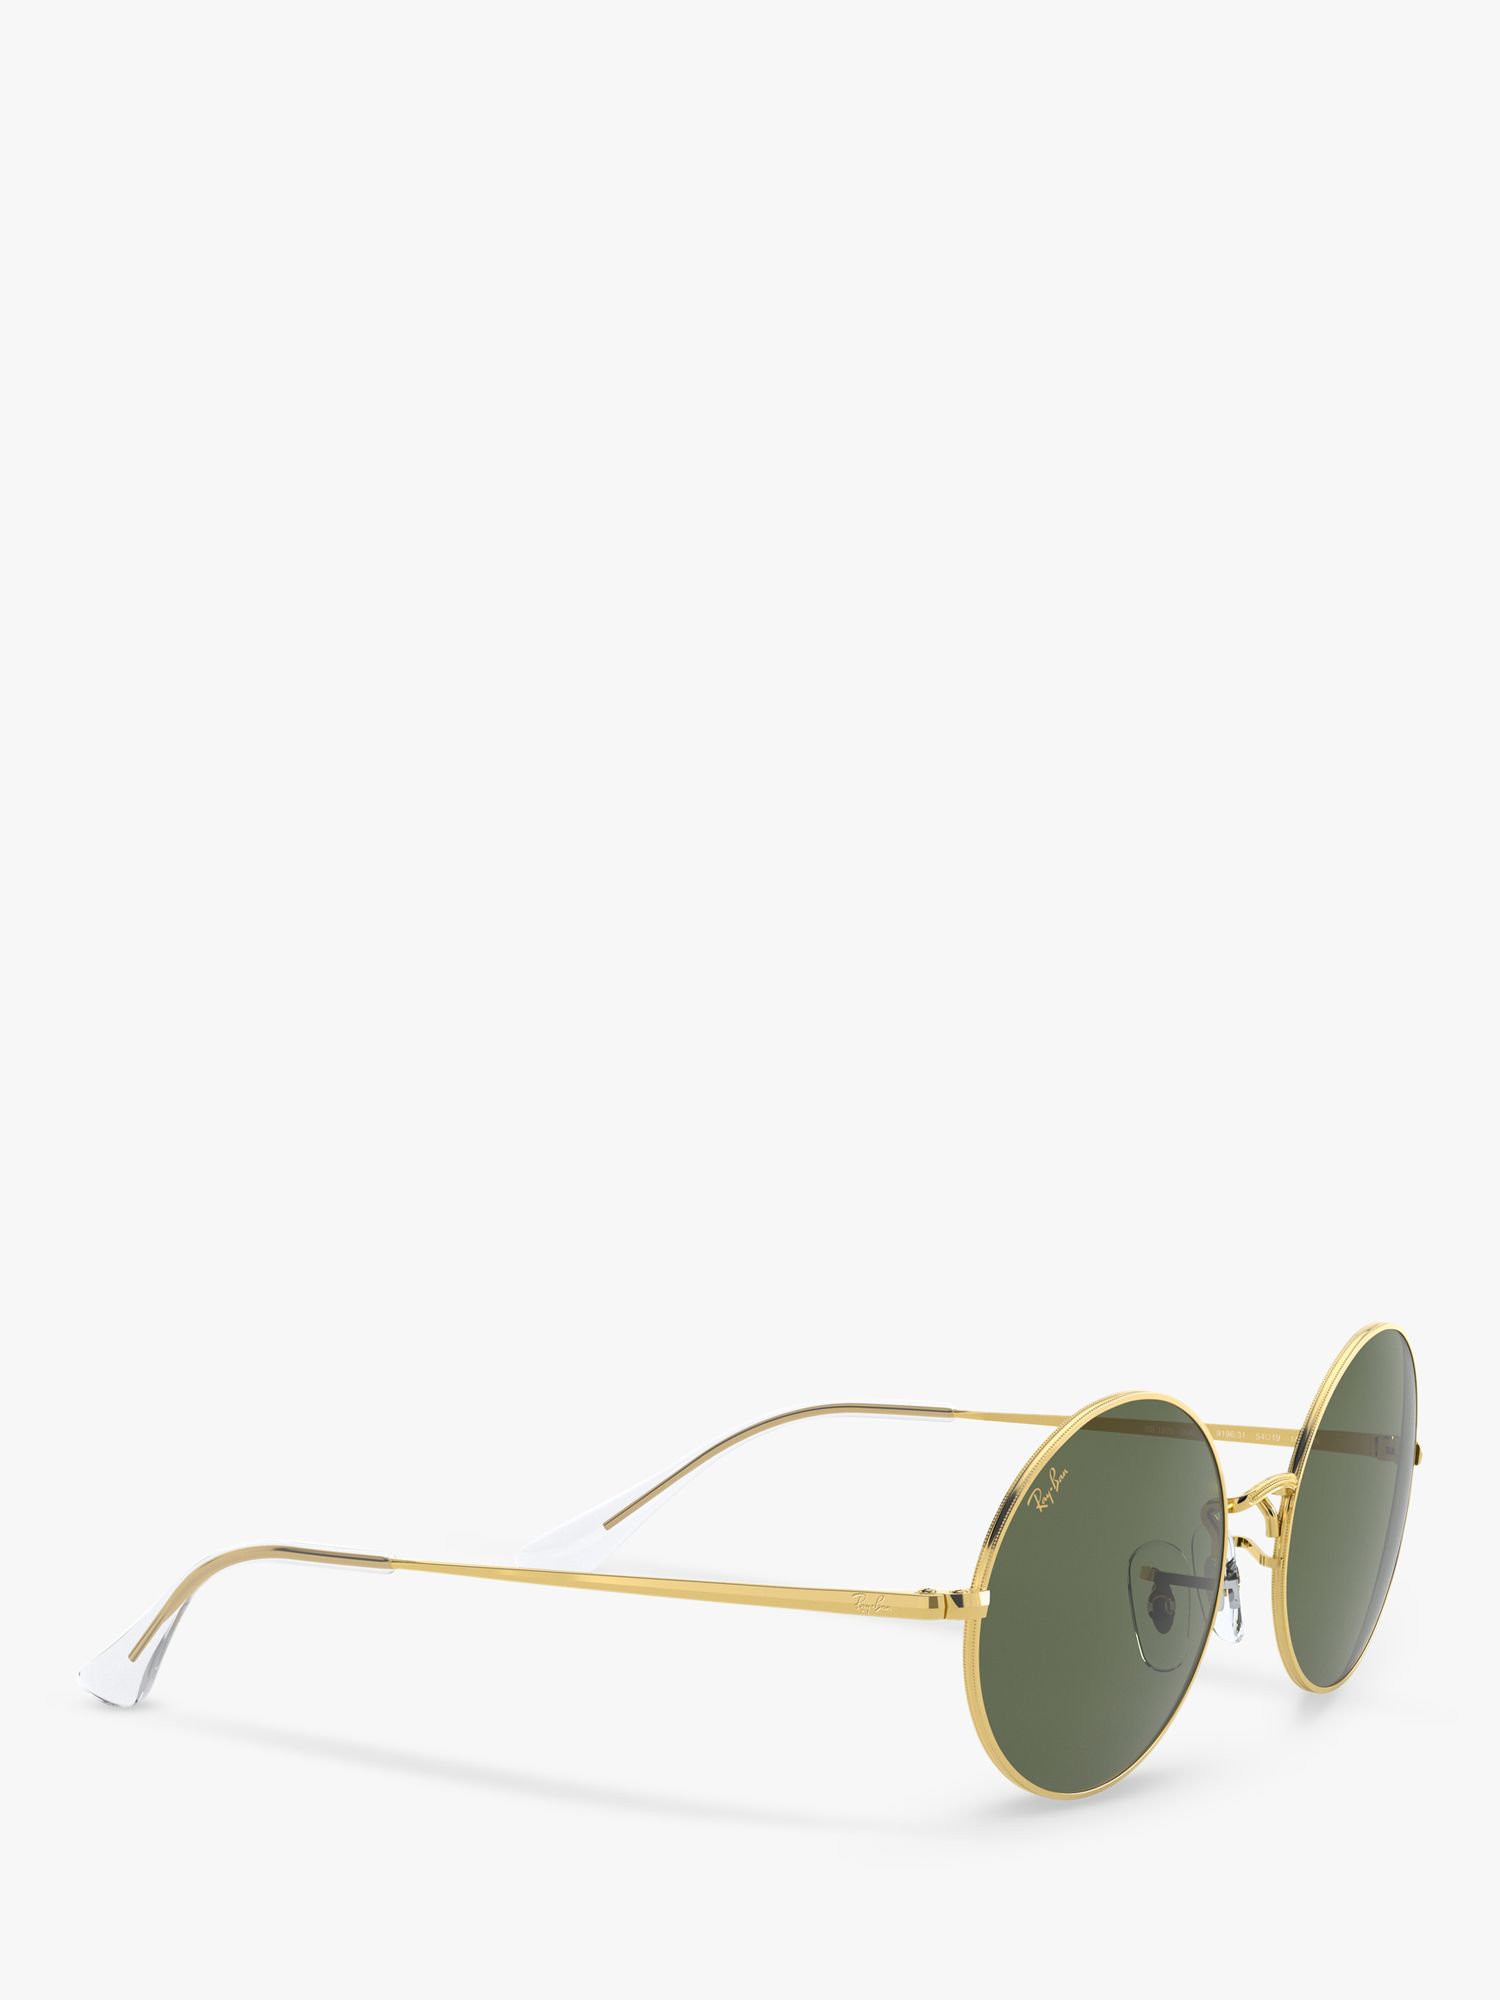 Ray-Ban RB1970 Unisex Oval Sunglasses, Legend Gold/Green at John Lewis &  Partners